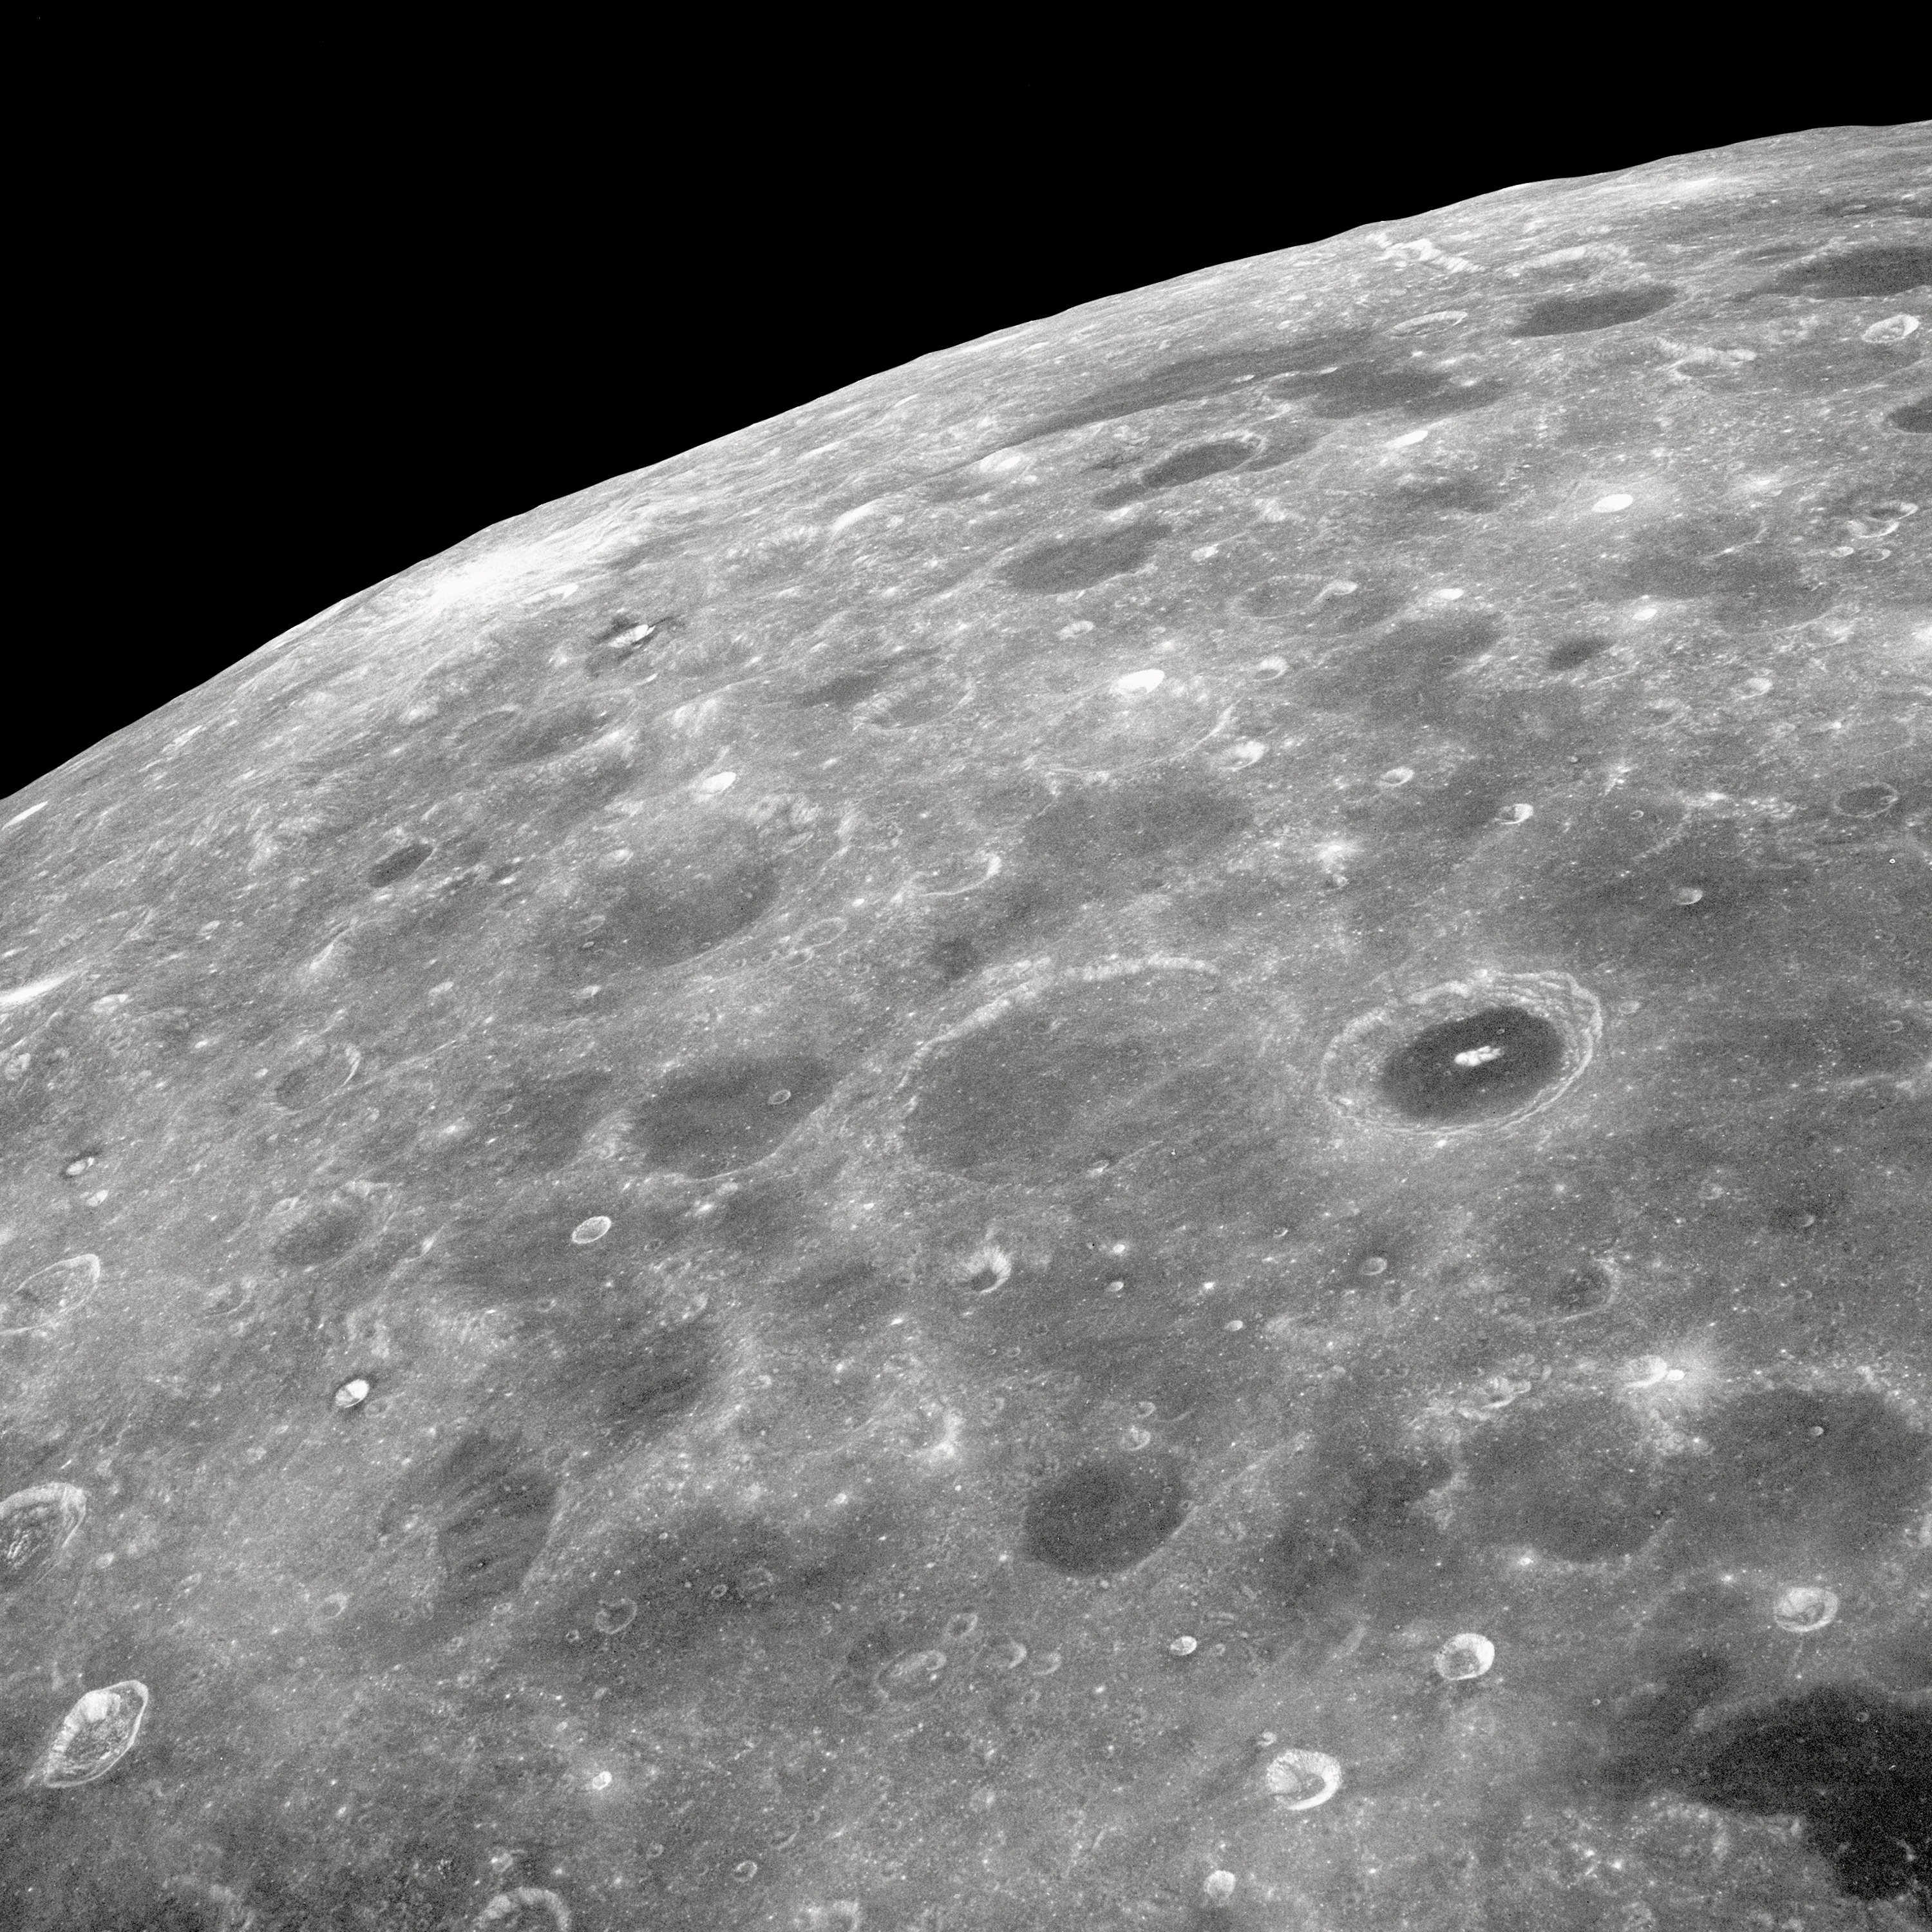 View of the lunar surface taken from the Apollo 8 spacecraft looking southward from high altitude across the Southern Sea. The bright-rayed crater near the horizon is located near 130 degrees east longitude and 70 degrees south latitude. The dark floored crater near the middle of the right side of the photograph is about 70 kilometers (45 statute miles) in diameter. Both features are beyond the eastern limb of the Moon as viewed from earth; neither has a name.